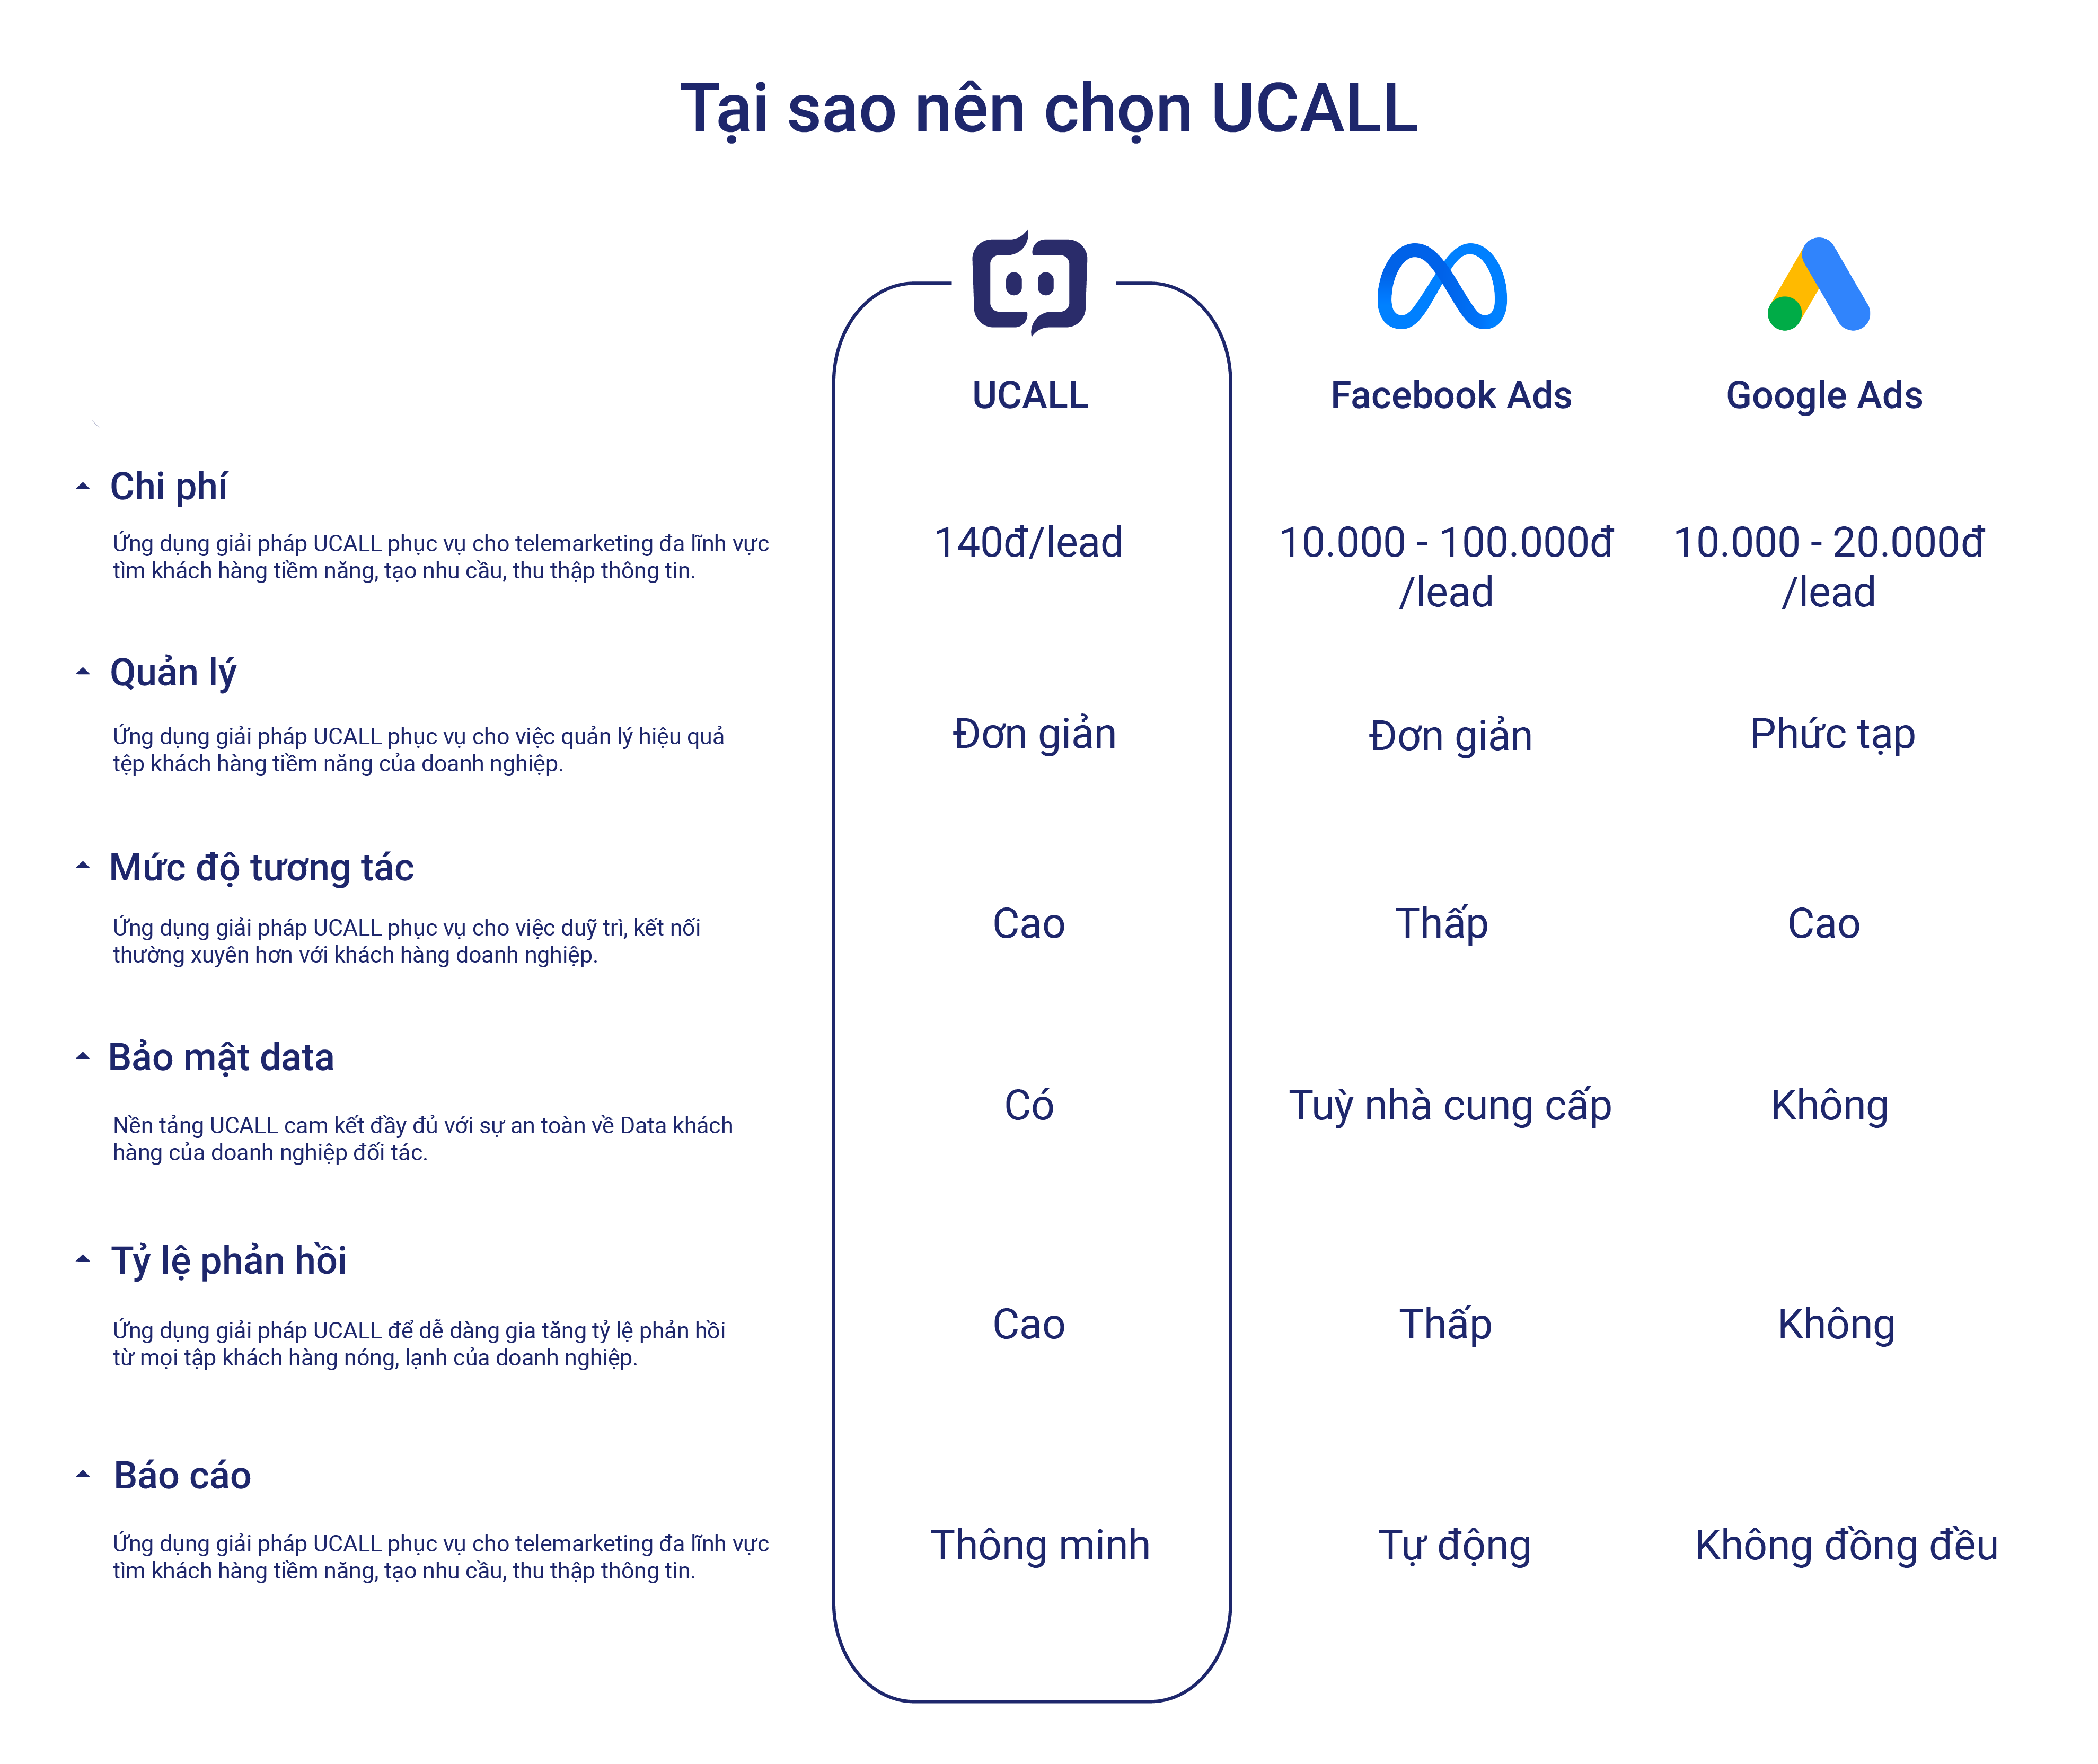 So sánh dịch vụ giữa UCALL, Facebook Ads, Google Ads